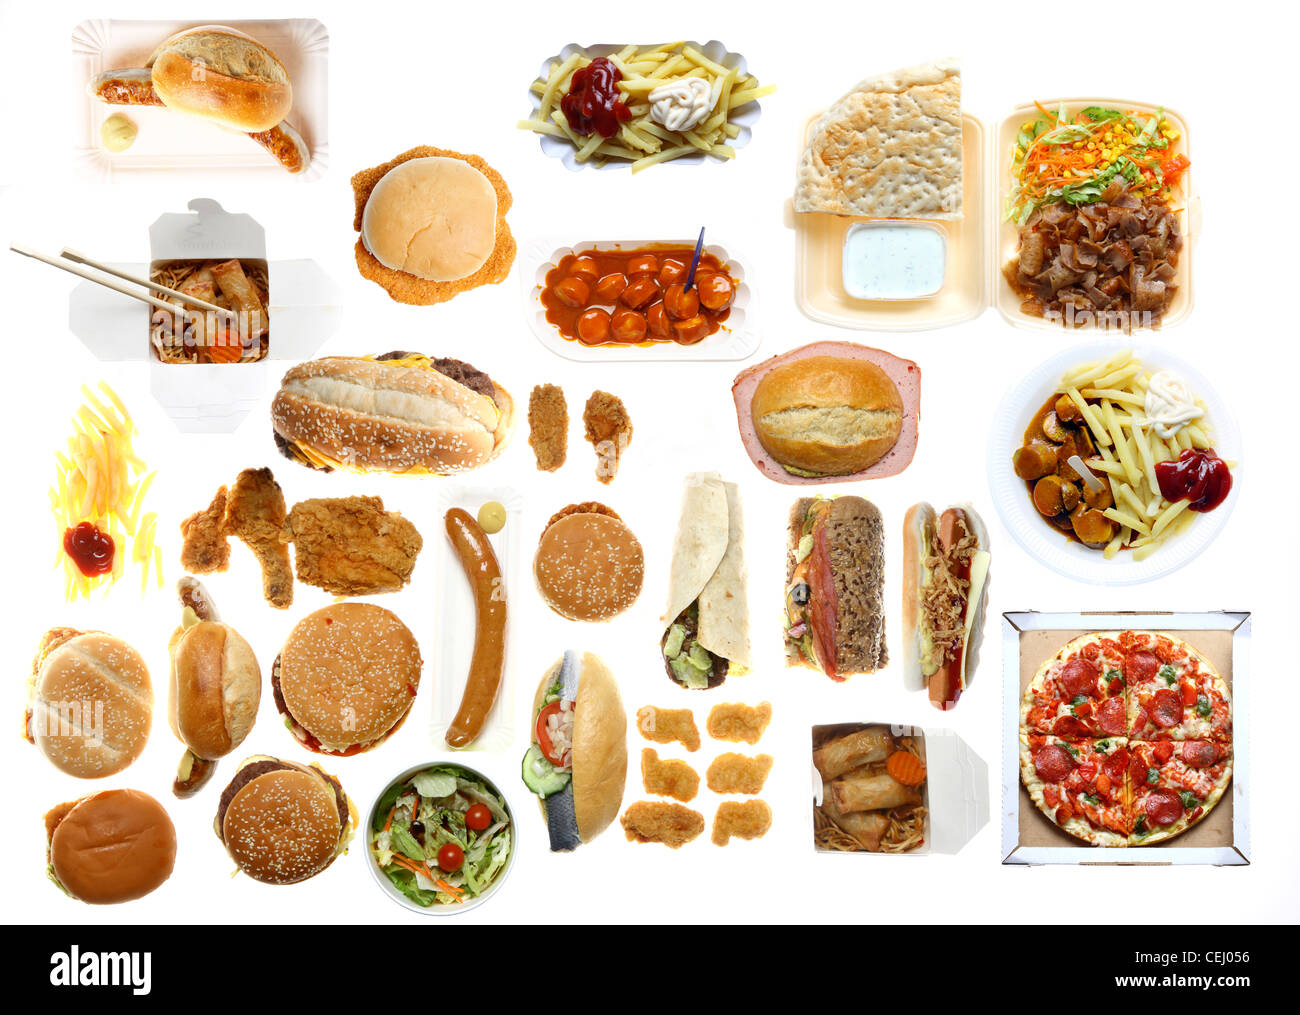 Nutrition. Compilation, composing different fast food dishes. Hot dog, Cheeseburger, Turkish kebab, pizza, sausages, sandwich. Stock Photo